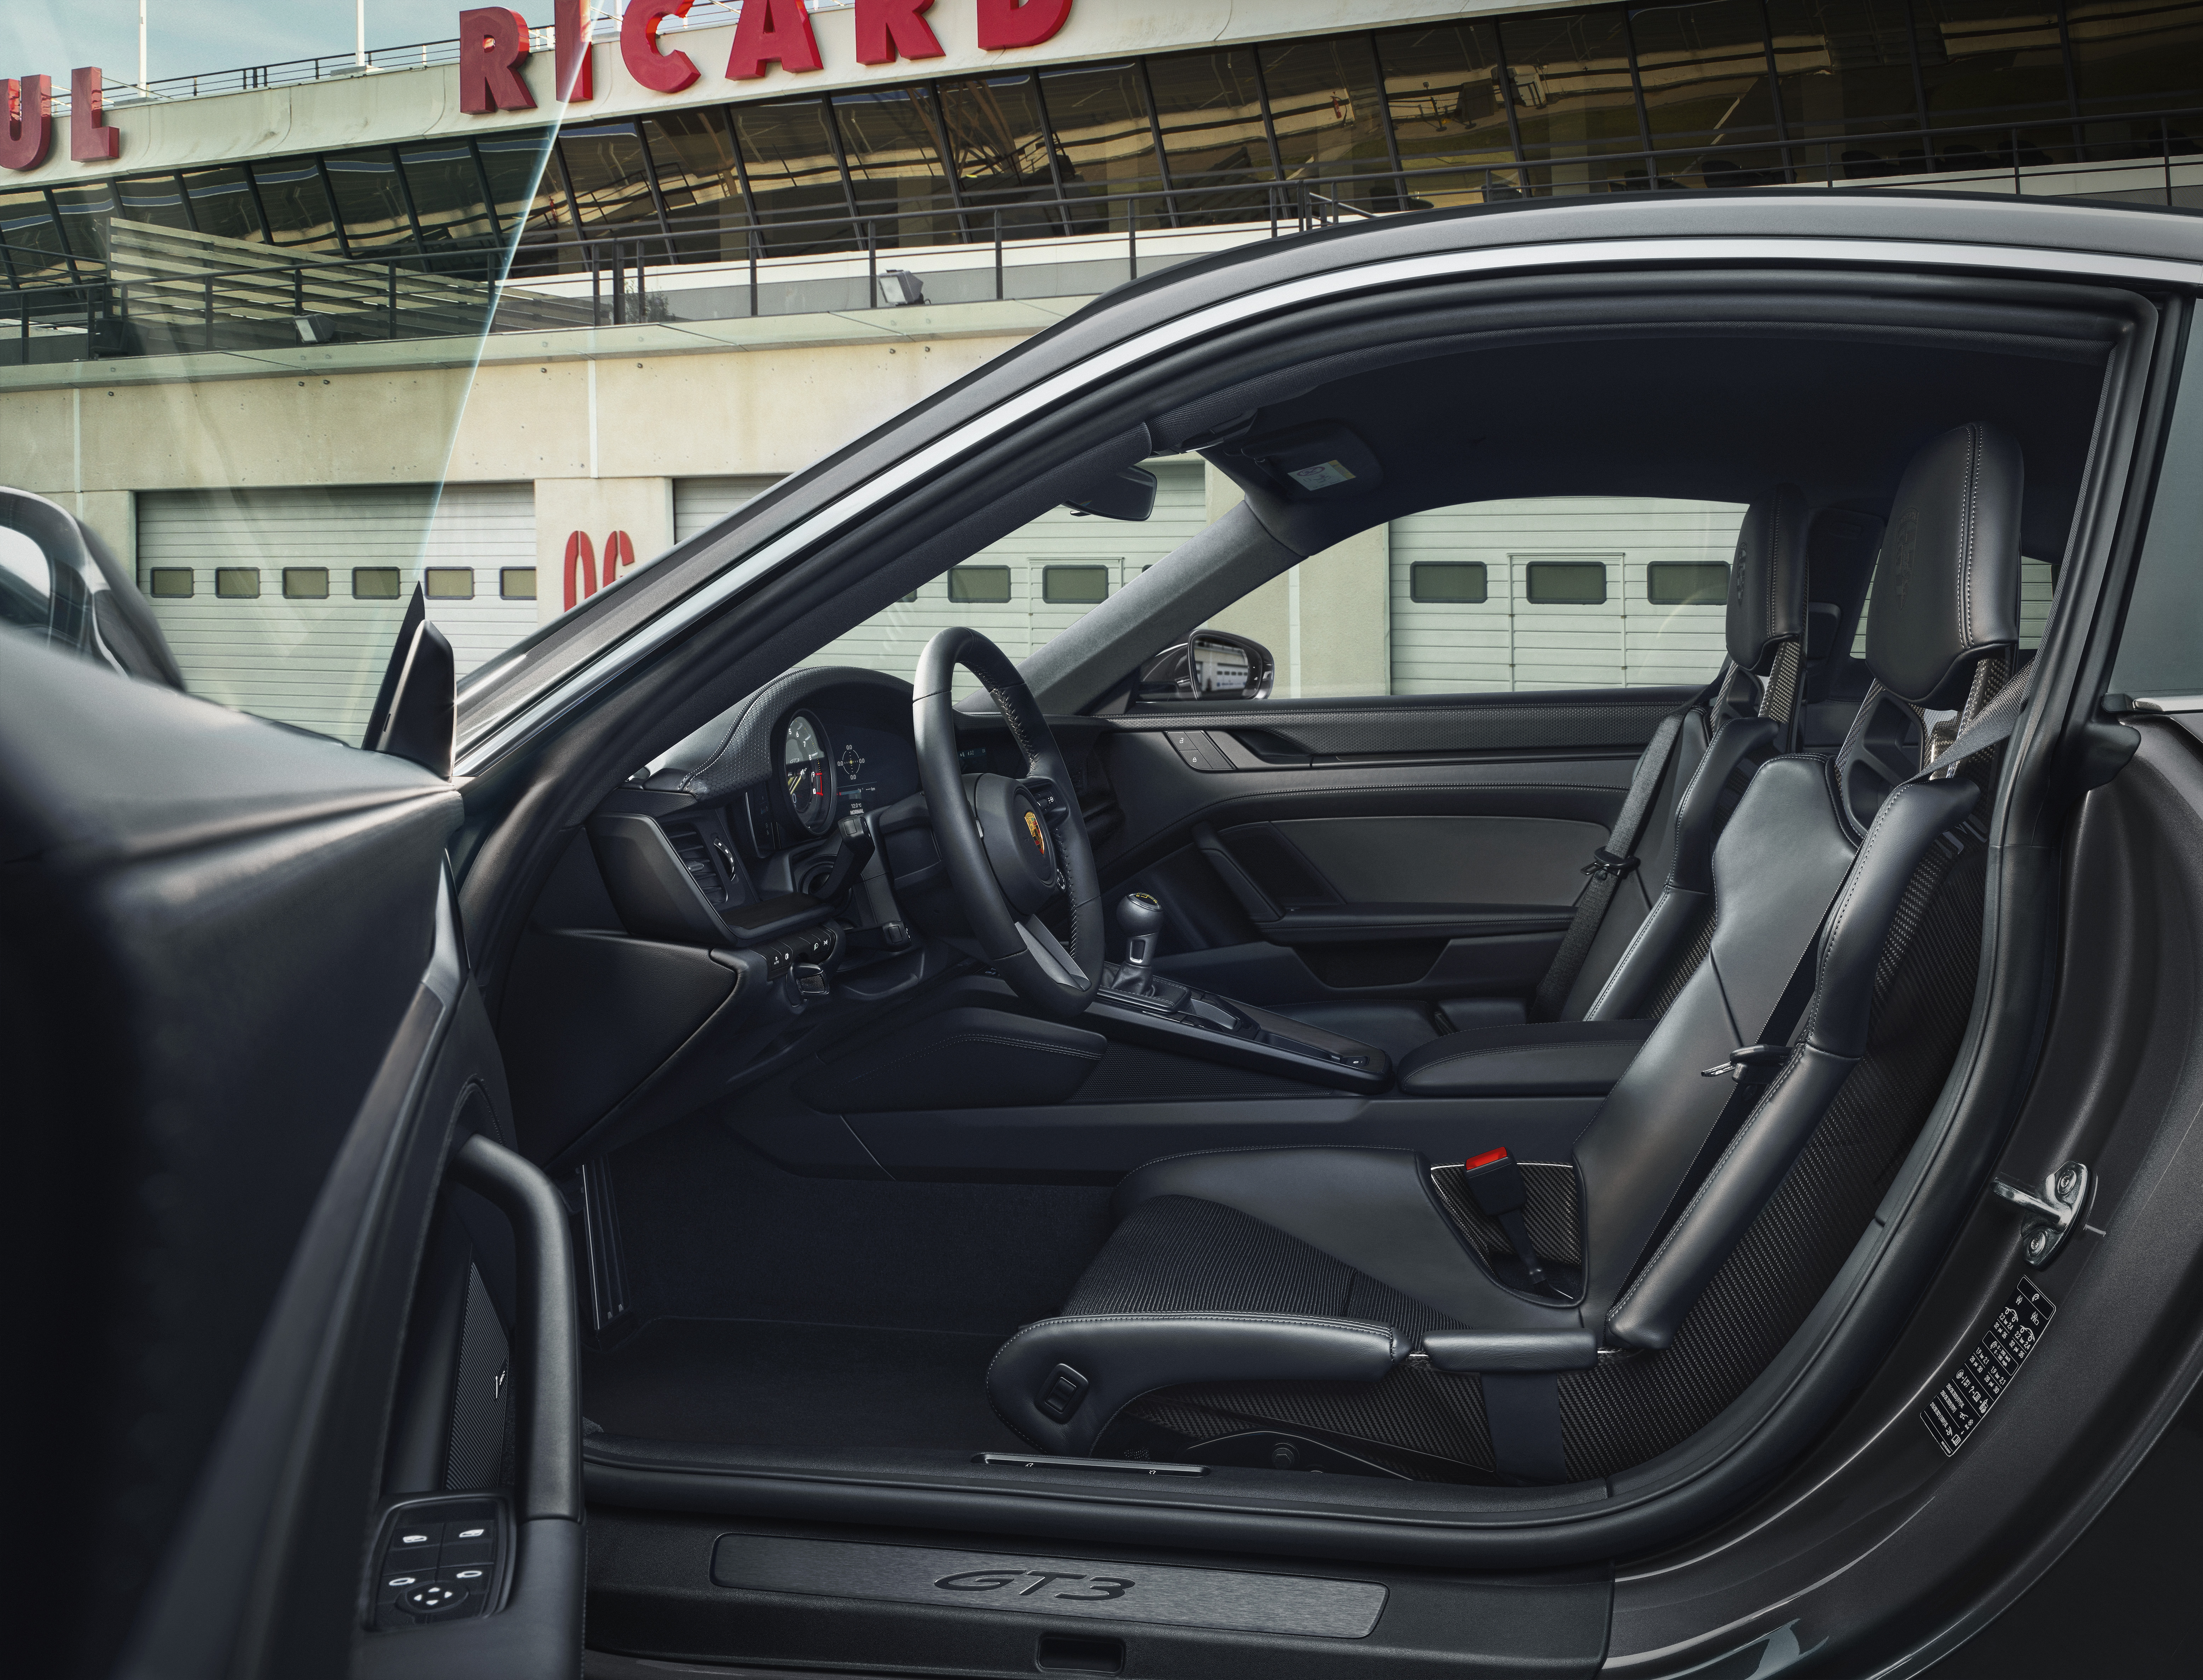 Interior shot of 911 GT3 with Touring Package at Paul Ricard circuit